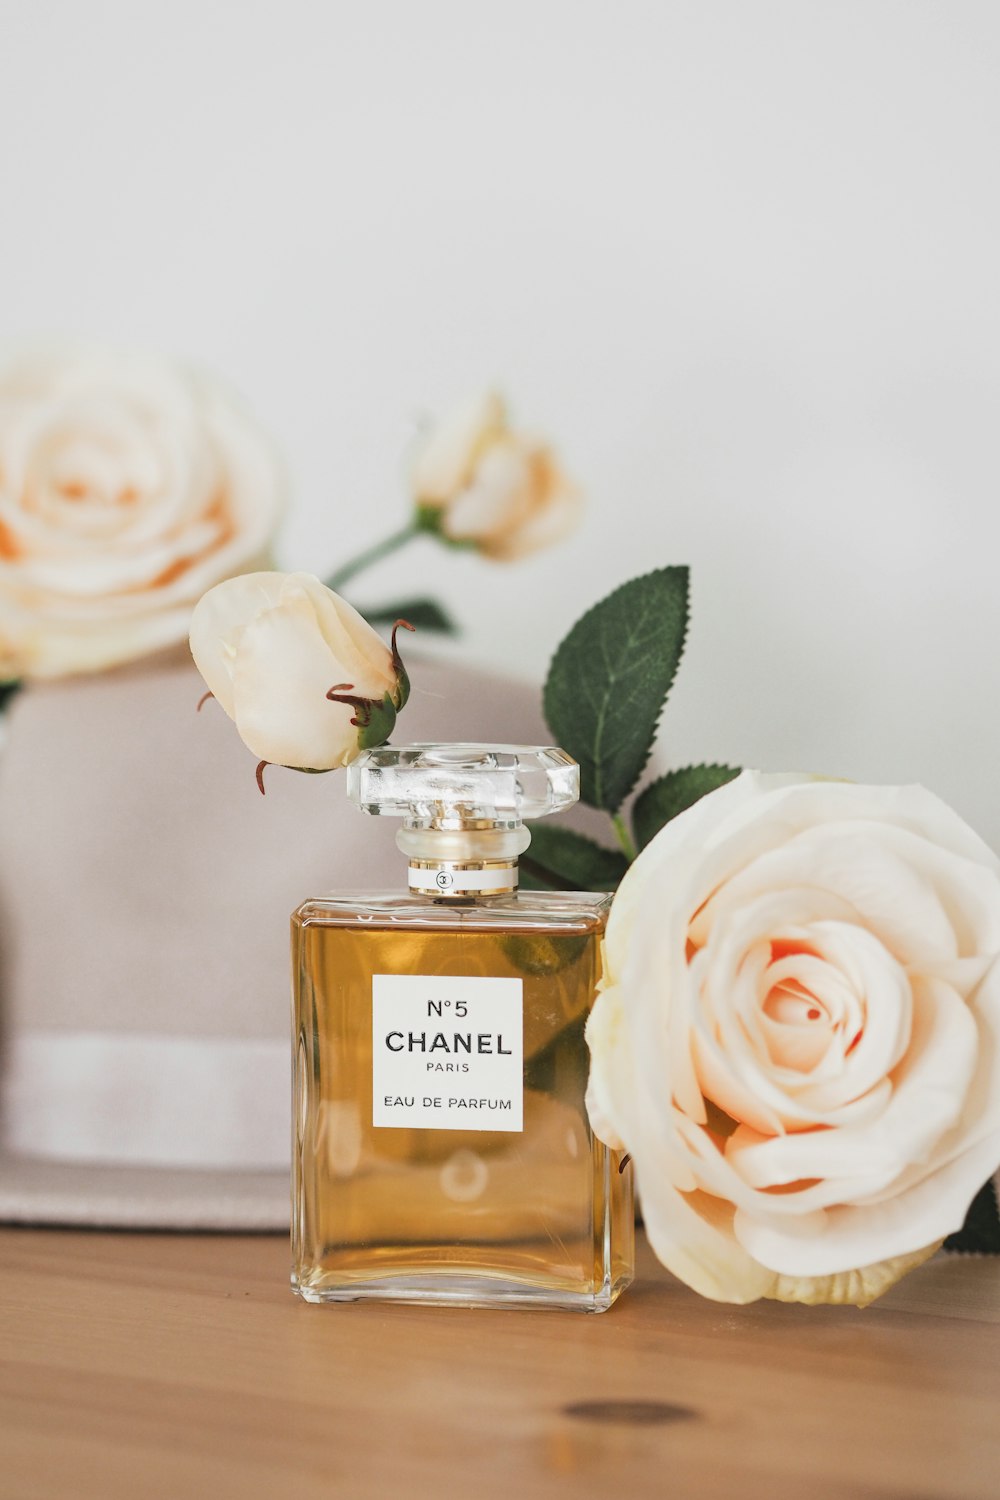 A bottle of chanel perfume sitting on a table next to flowers